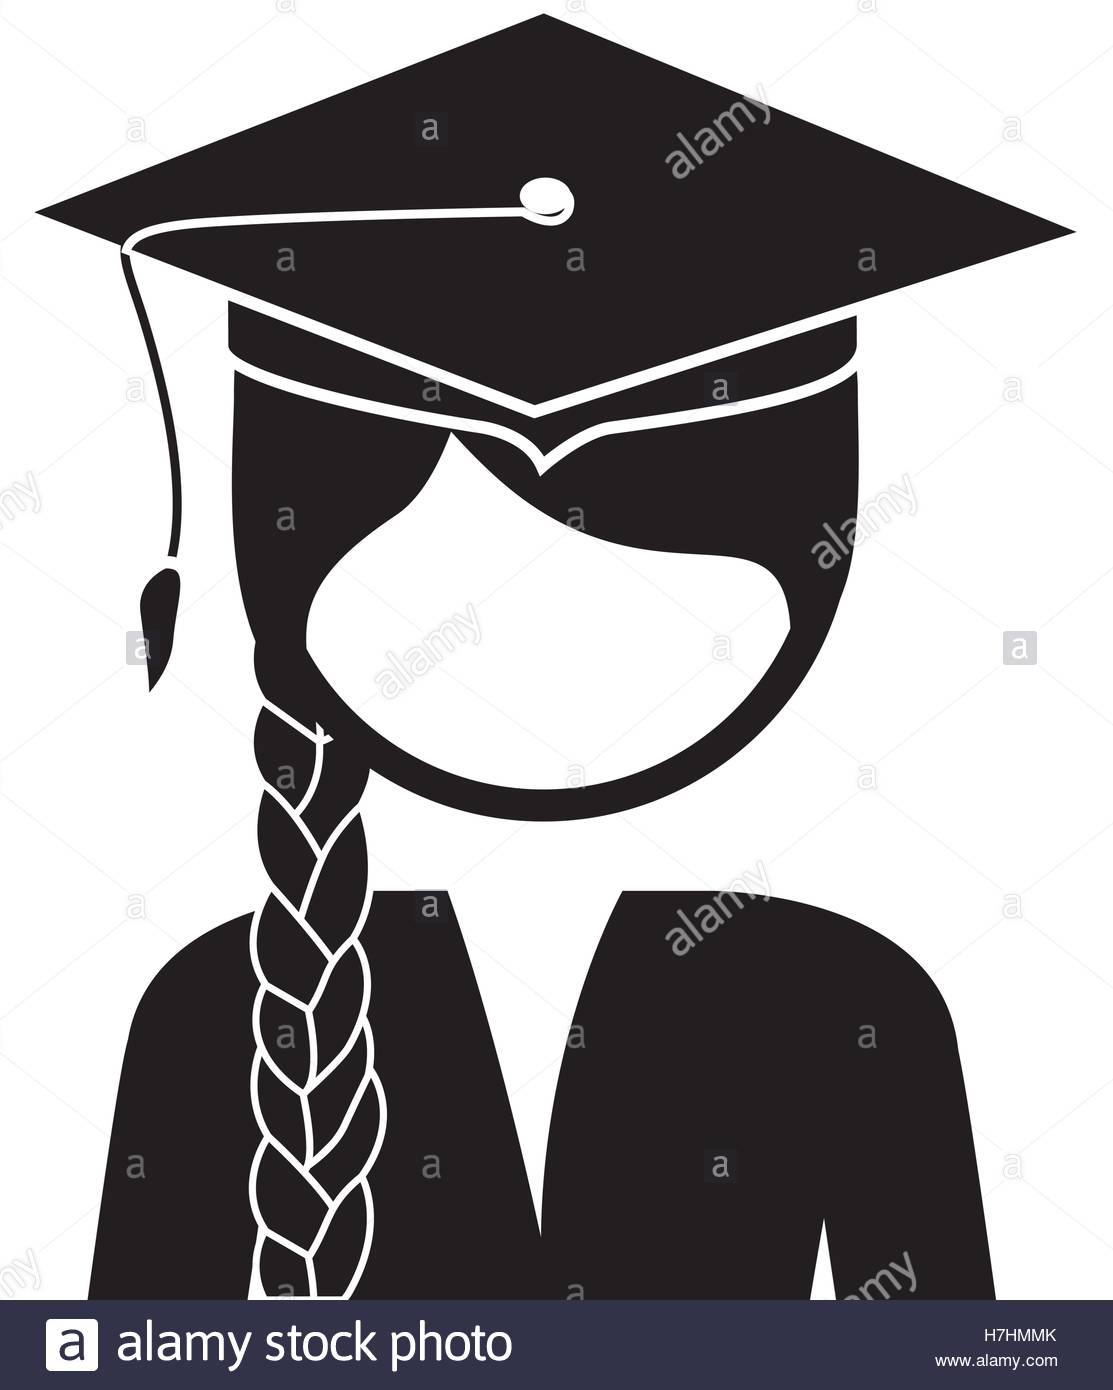 Graduation Cap Icon - free download, PNG and vector